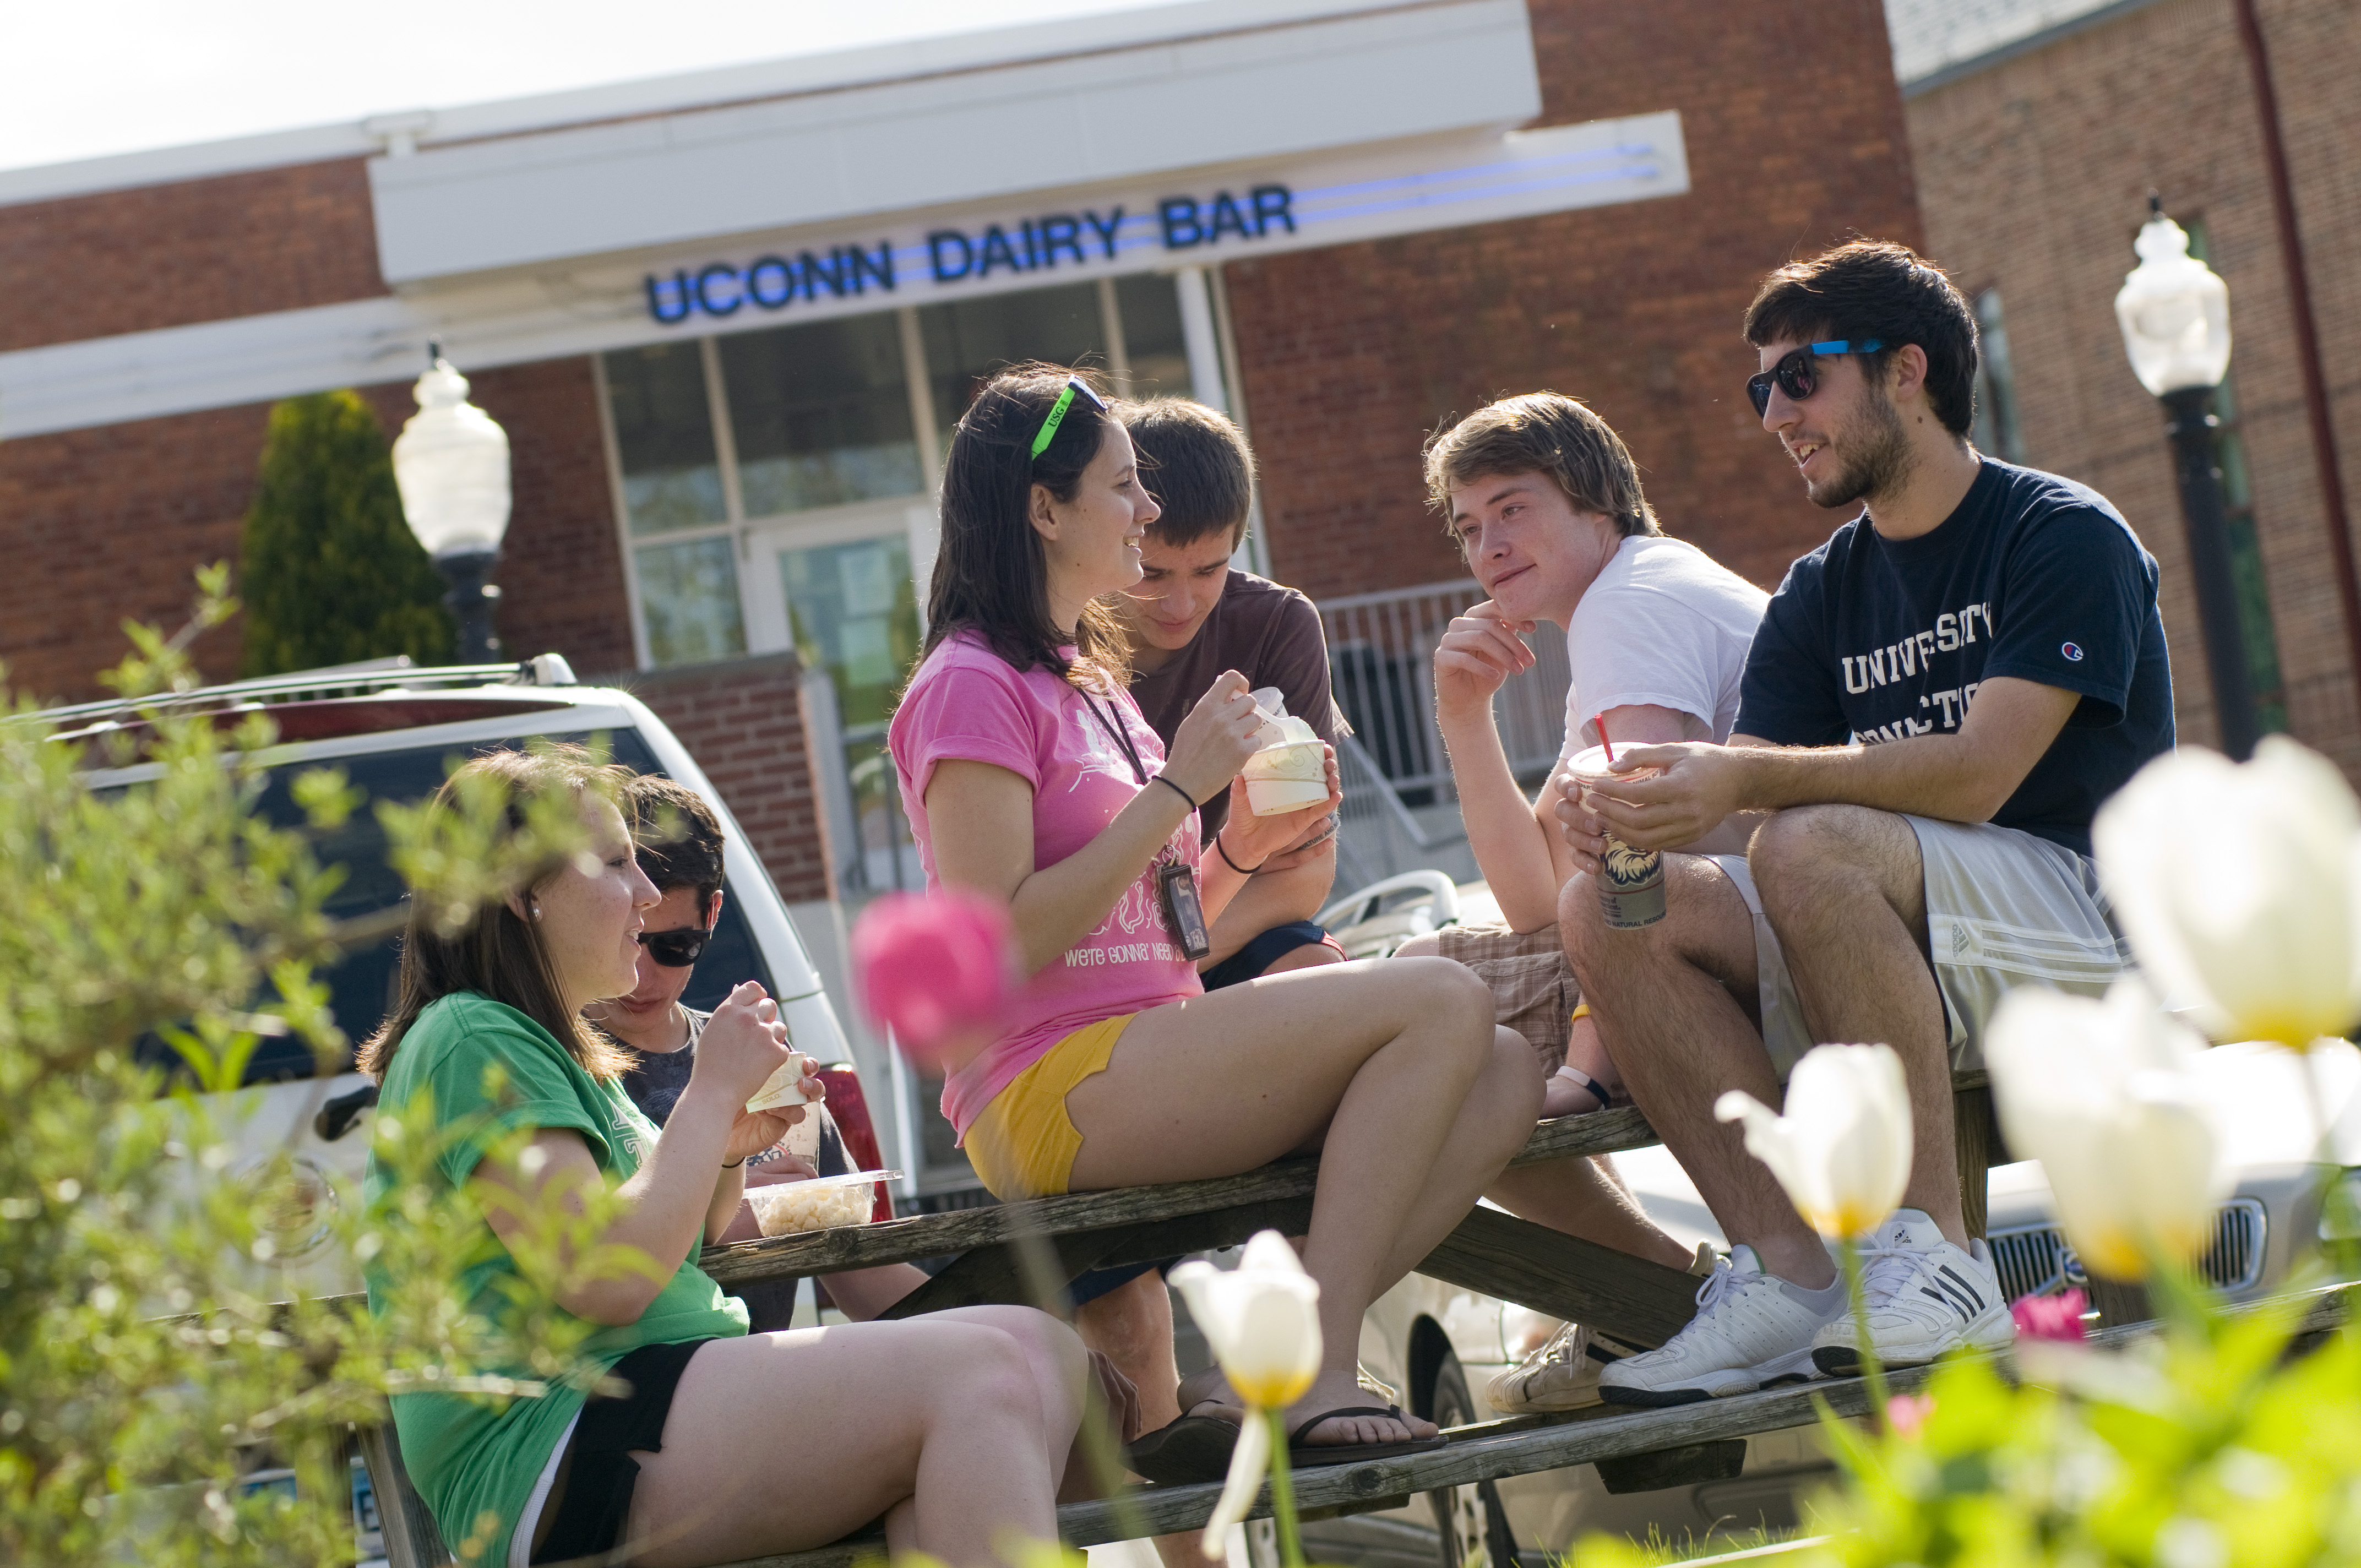 Students eating ice cream outside the UConn Dairy Bar.